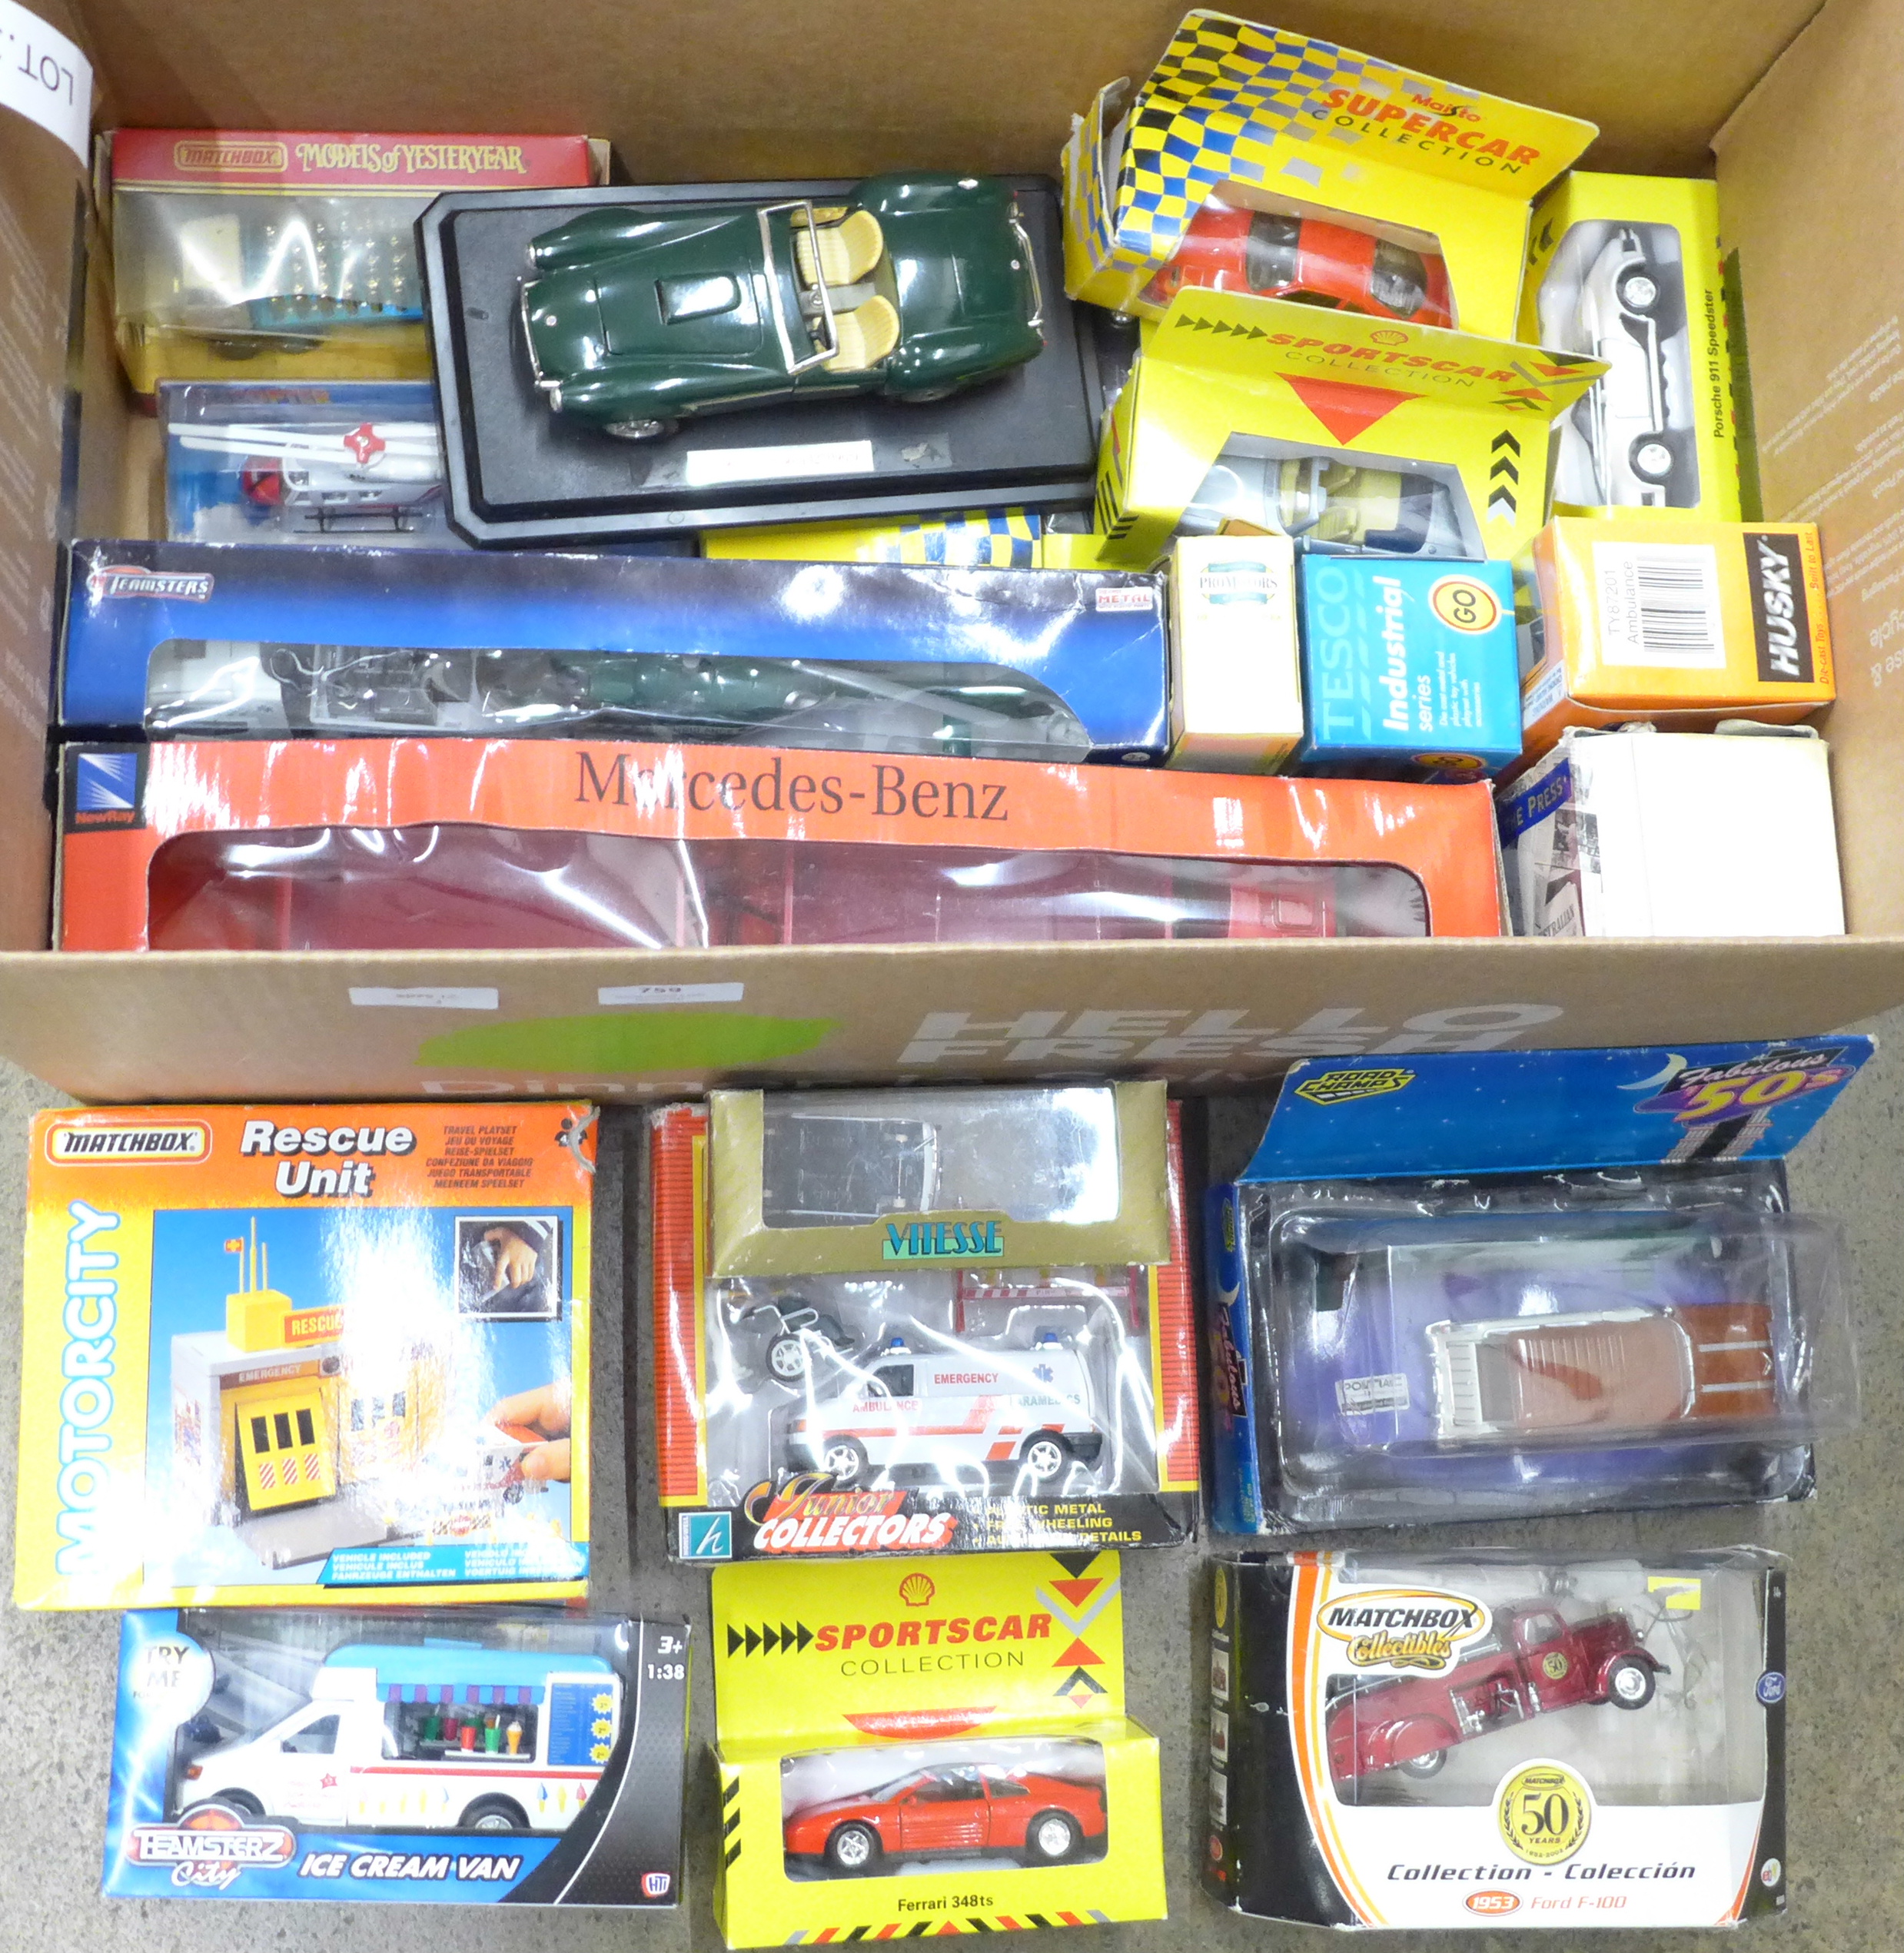 A collection of die-cast model vehicles, boxed